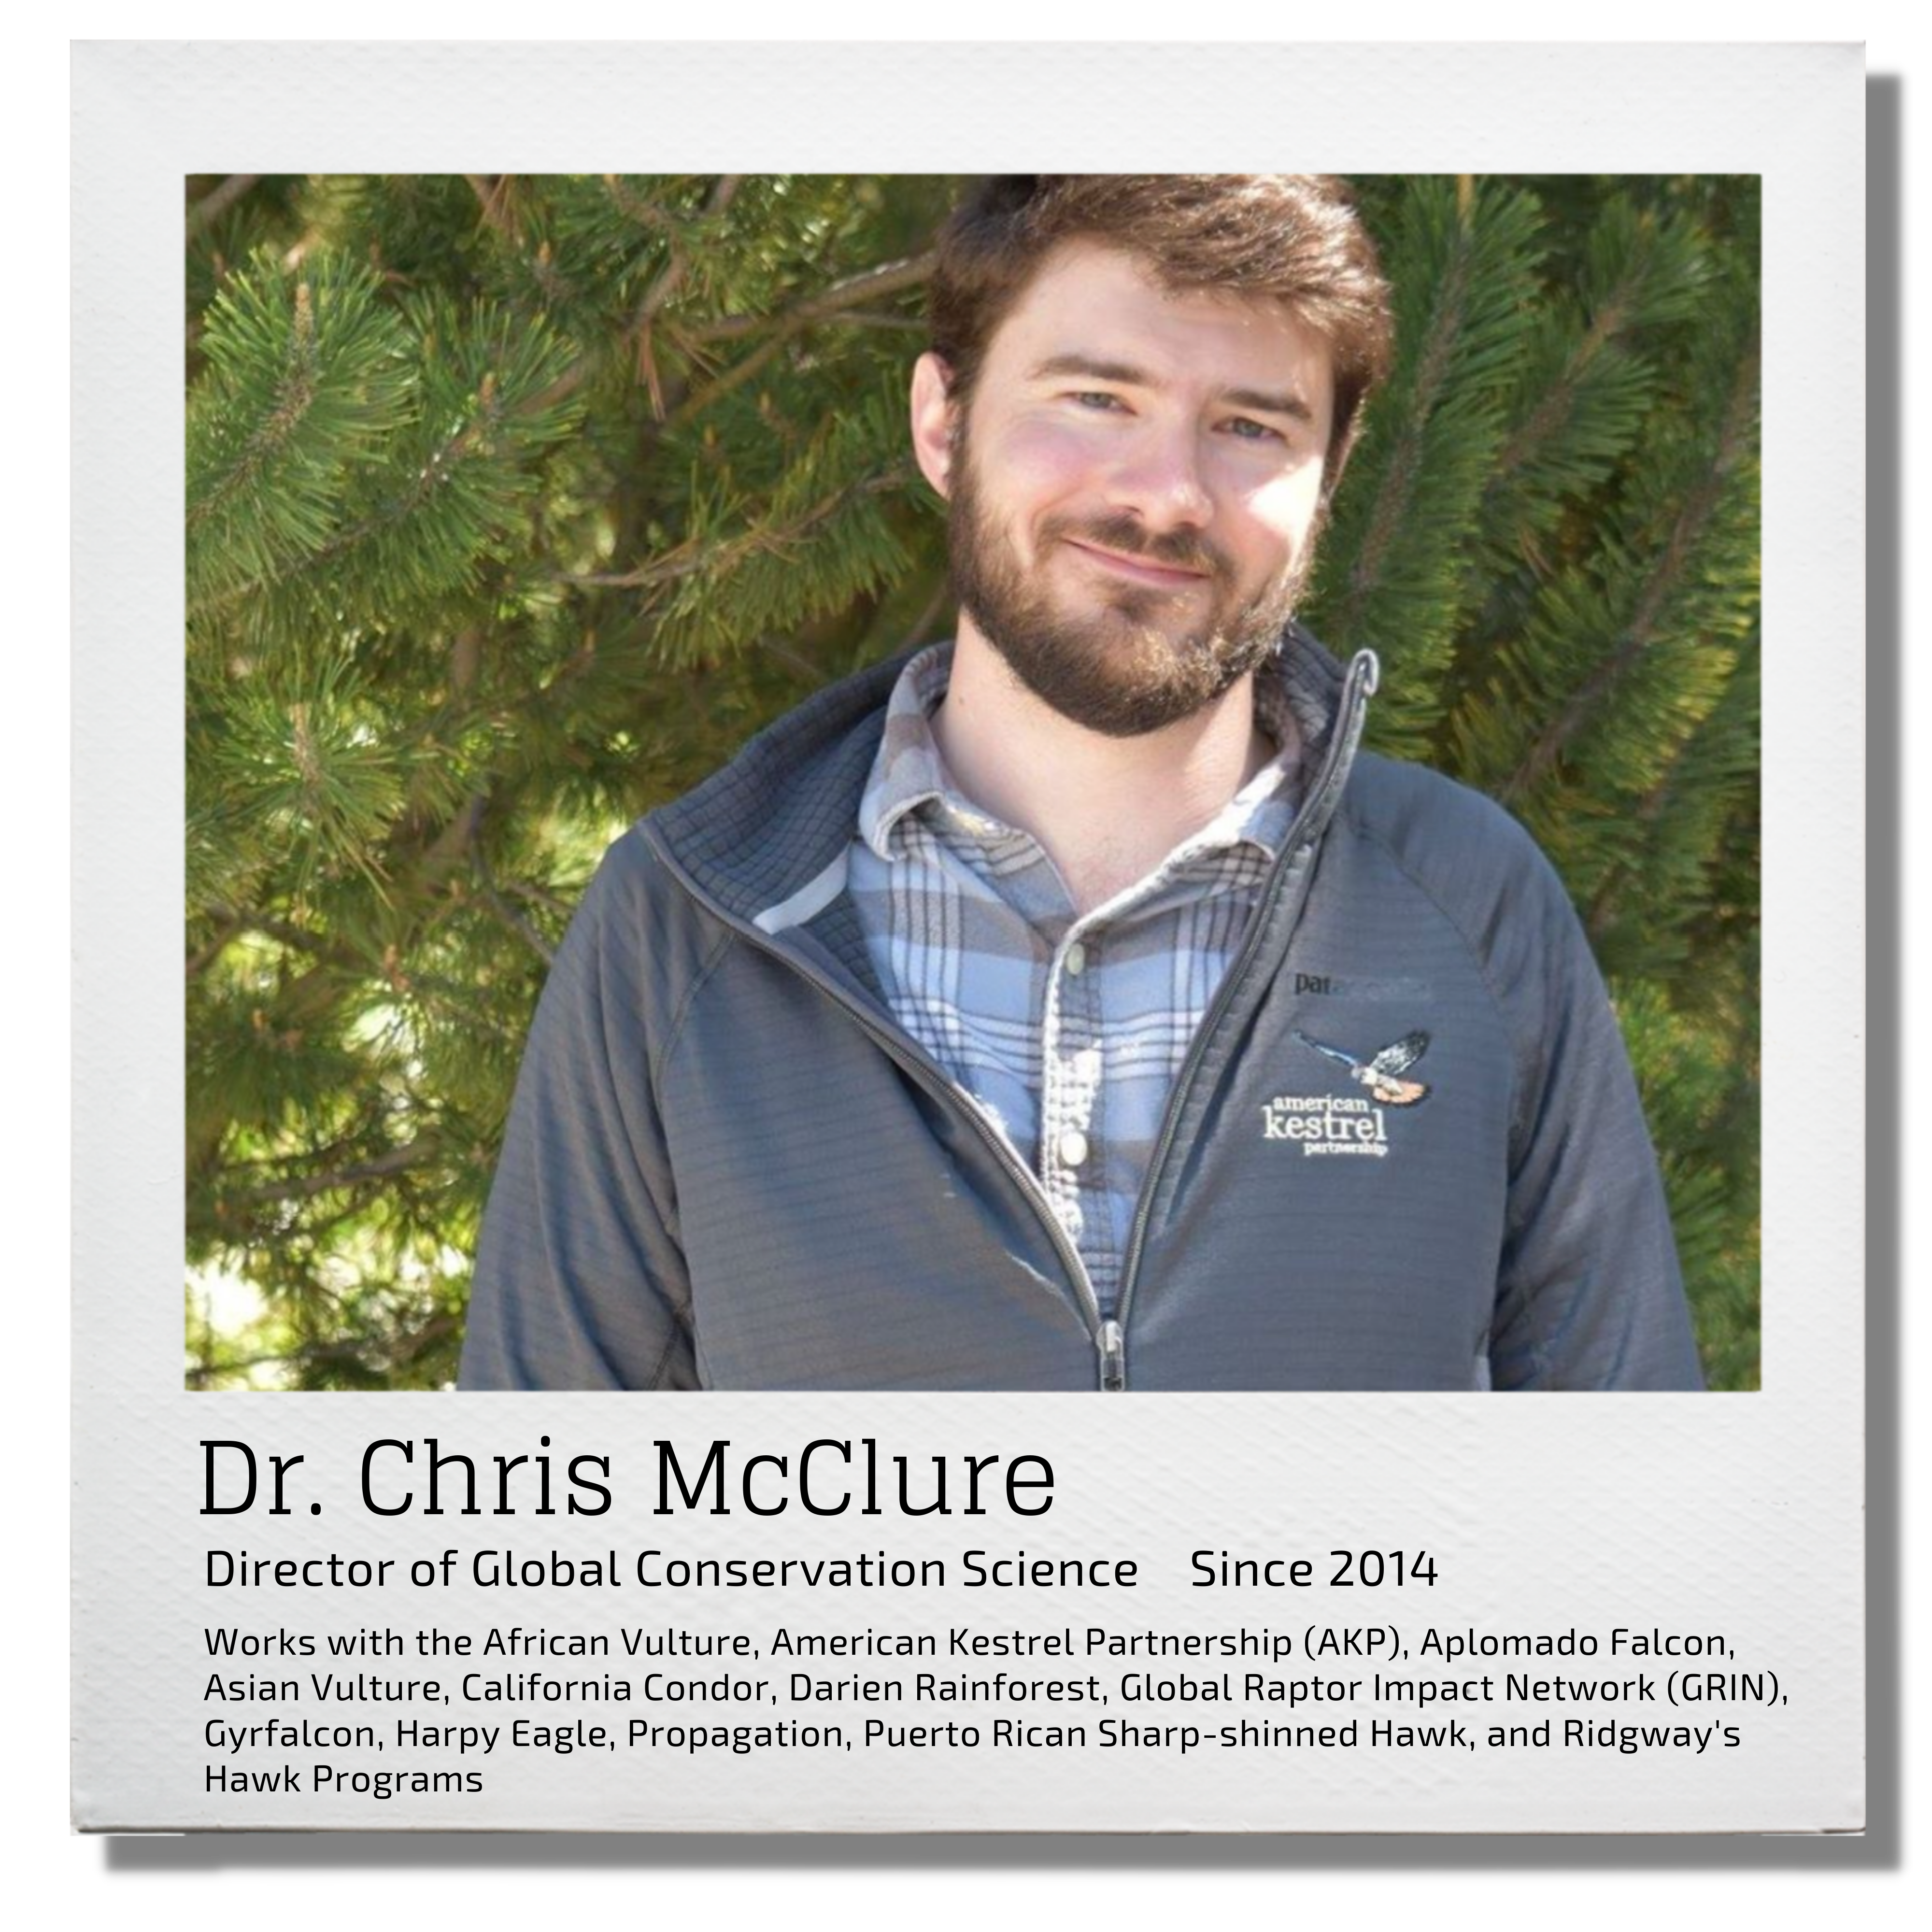 Dr. Chris McClure, Director of Global Conservation Since 2014, {&quot;A?&quot;:&quot;B&quot;,&quot;a&quot;:5,&quot;d&quot;:&quot;B&quot;,&quot;h&quot;:&quot;www.canva.com&quot;,&quot;c&quot;:&quot;DAEkLs9bWYU&quot;,&quot;i&quot;:&quot;RFZ5stNr_jSBcT-0lgKhWQ&quot;,&quot;b&quot;:1626297110259,&quot;A&quot;:[{&quot;A?&quot;:&quot;K&quot;,&quot;A&quot;:1607.5753113620983,&quot;B&quot;:202.16763273295896,&quot;D&quot;:1623.7029251900503,&quot;C&quot;:180.21678325352474,&quot;a&quot;:{&quot;A&quot;:[{&quot;A?&quot;:&quot;A&quot;,&quot;A&quot;:&quot;Works with the African Vulture, American Kestrel Partnership (AKP), Aplomado Falcon, Asian Vulture, California Condor, Darien Rainforest, Global Raptor Impact Network (GRIN), Gyrfalcon, Harpy Eagle, Propagat